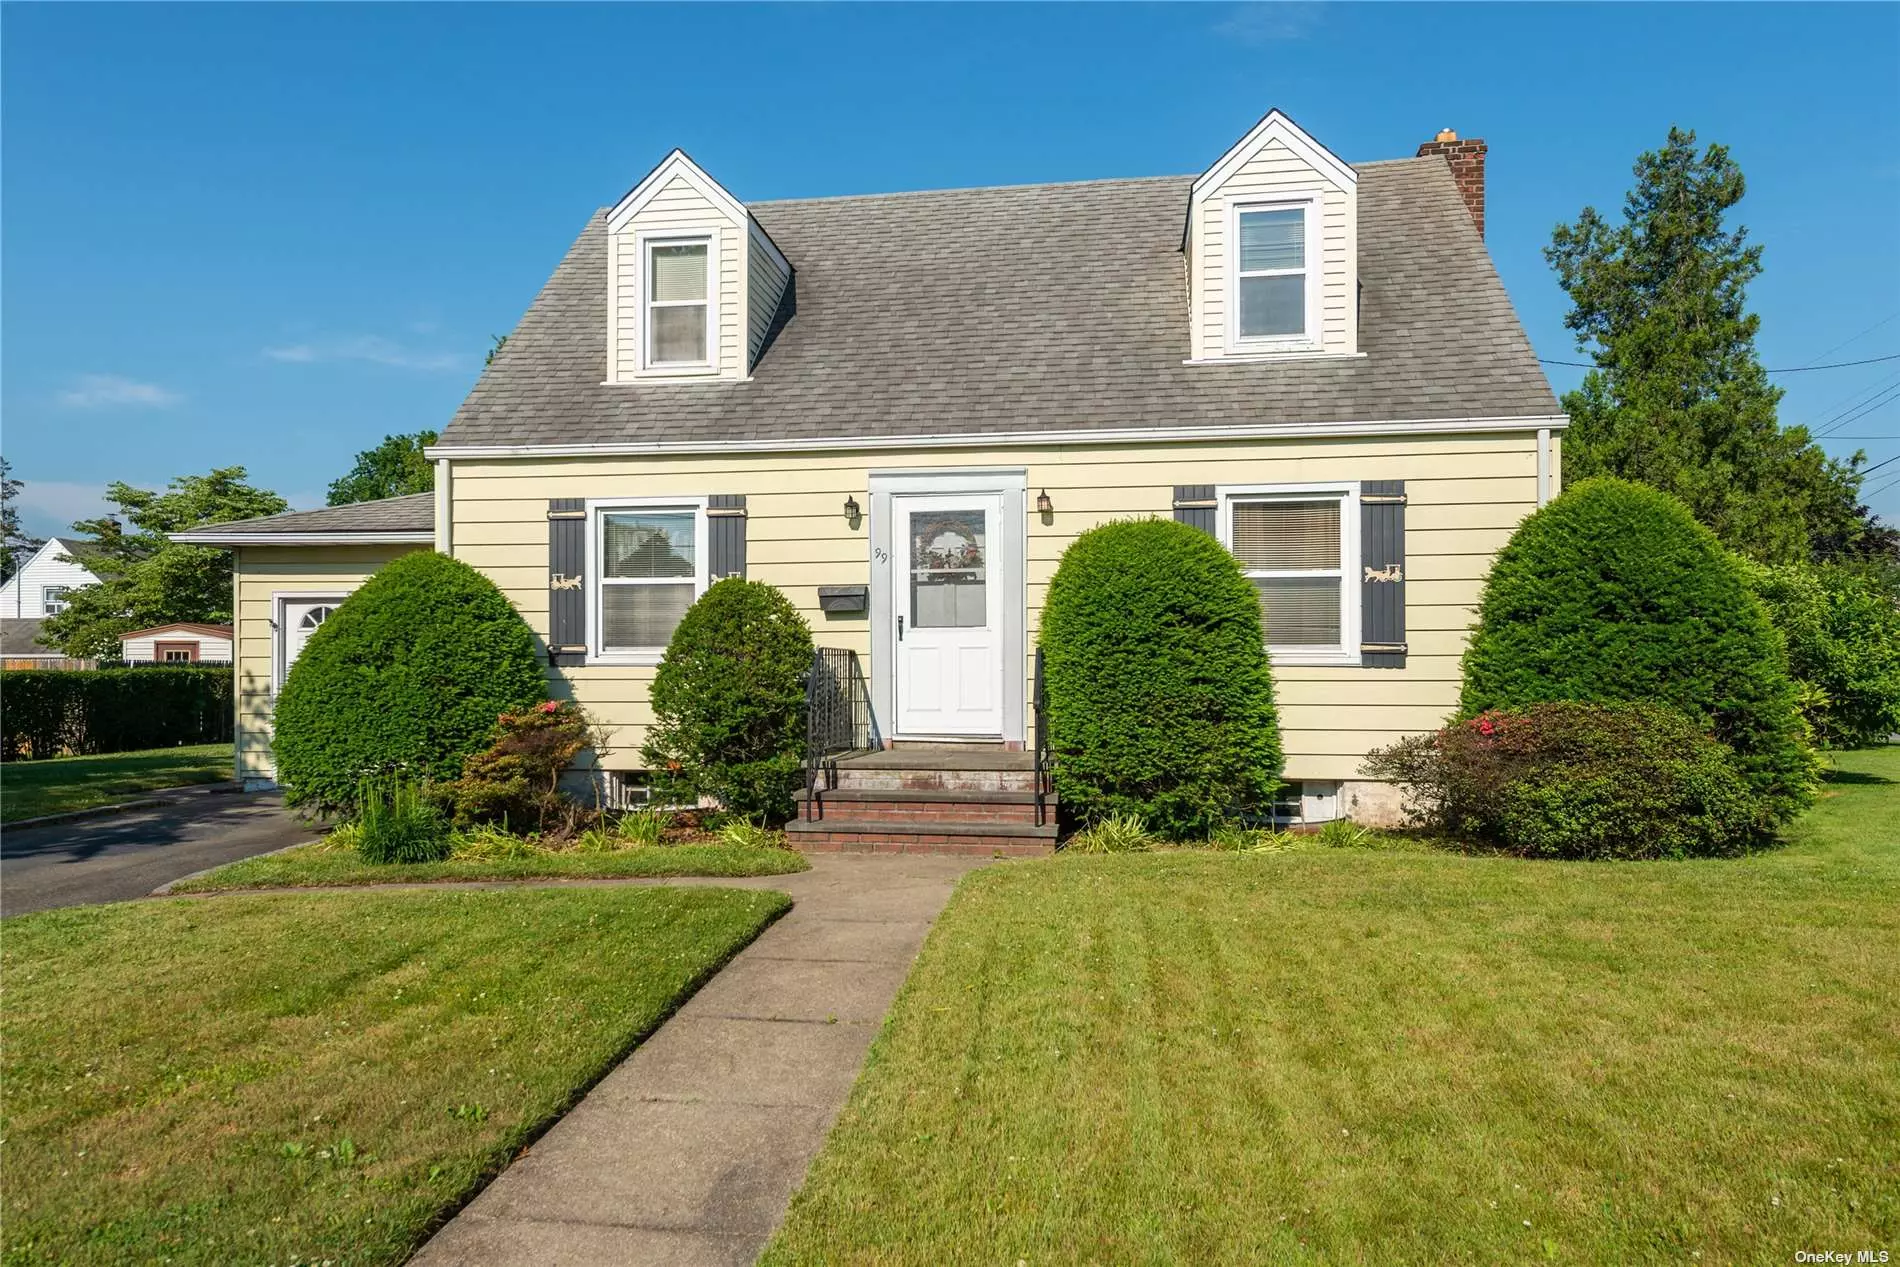 Spacious & Bright throughout! A wide-line cape-style home with 2 full baths a full basement, living room, eat-in-kitchen, 4 bedrooms, hardwood floors, updated kitchen and baths. Lovely property 100 x 100. Gas is in the house already. Low taxes- a must see!!!!